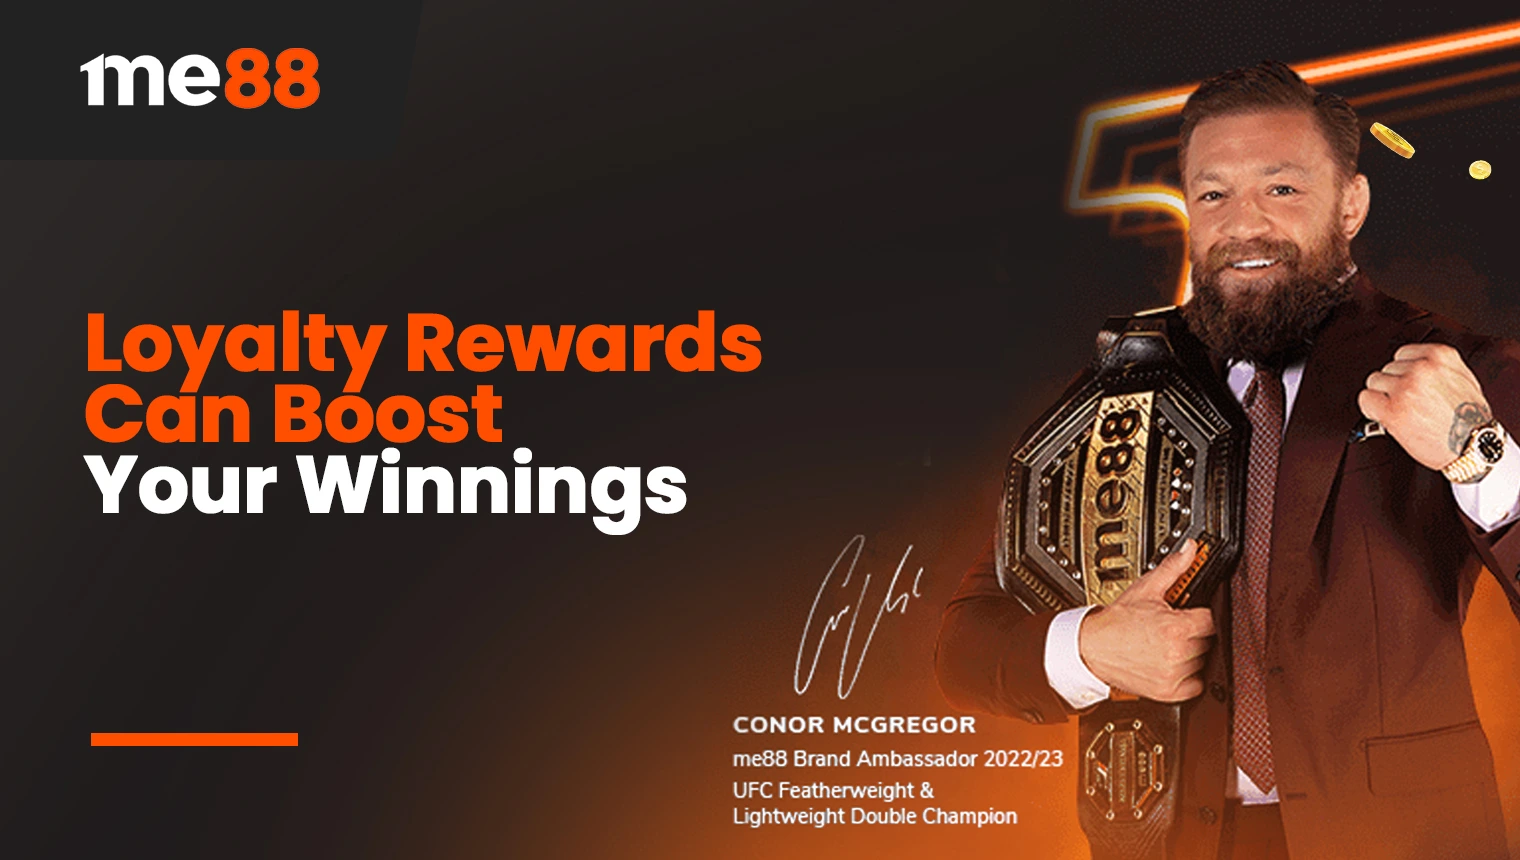 Loyalty Rewards Can Boost Your Winnings